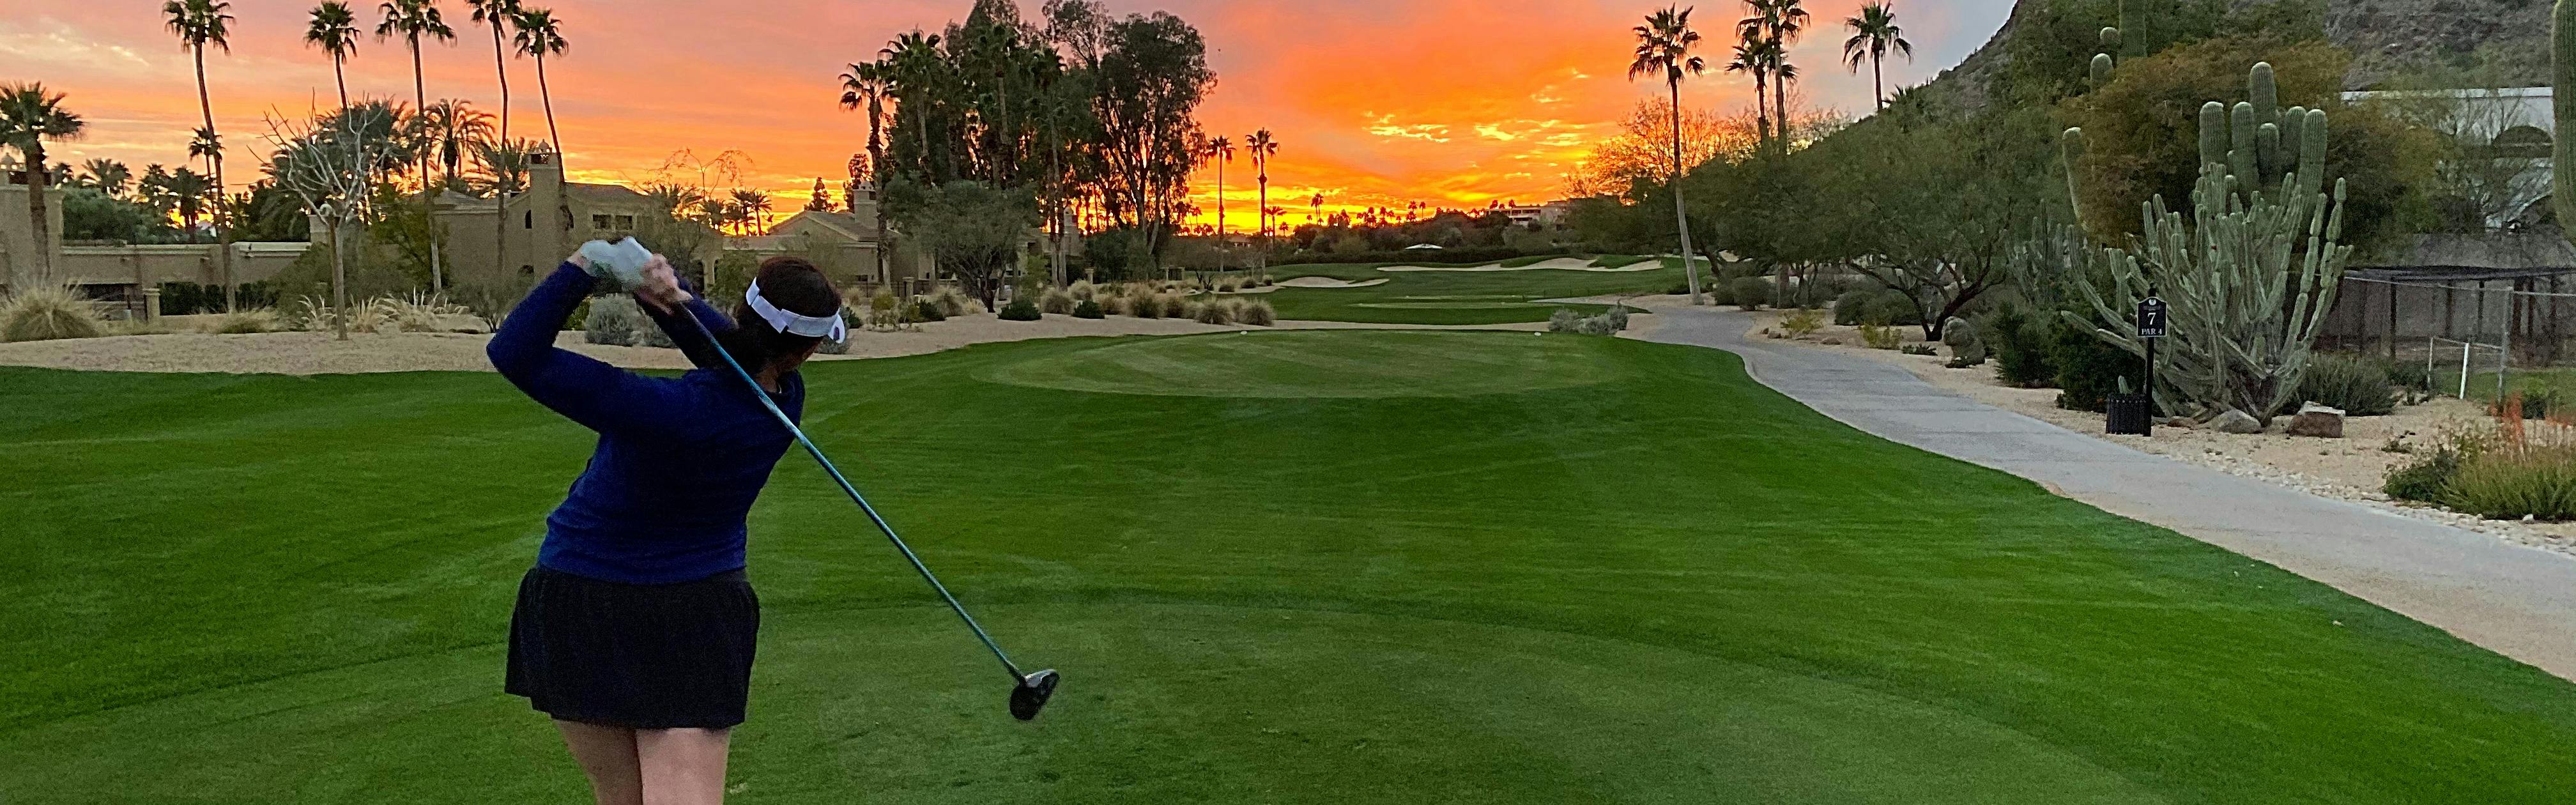 A woman swings a golf club while looking out towards an orange sunset